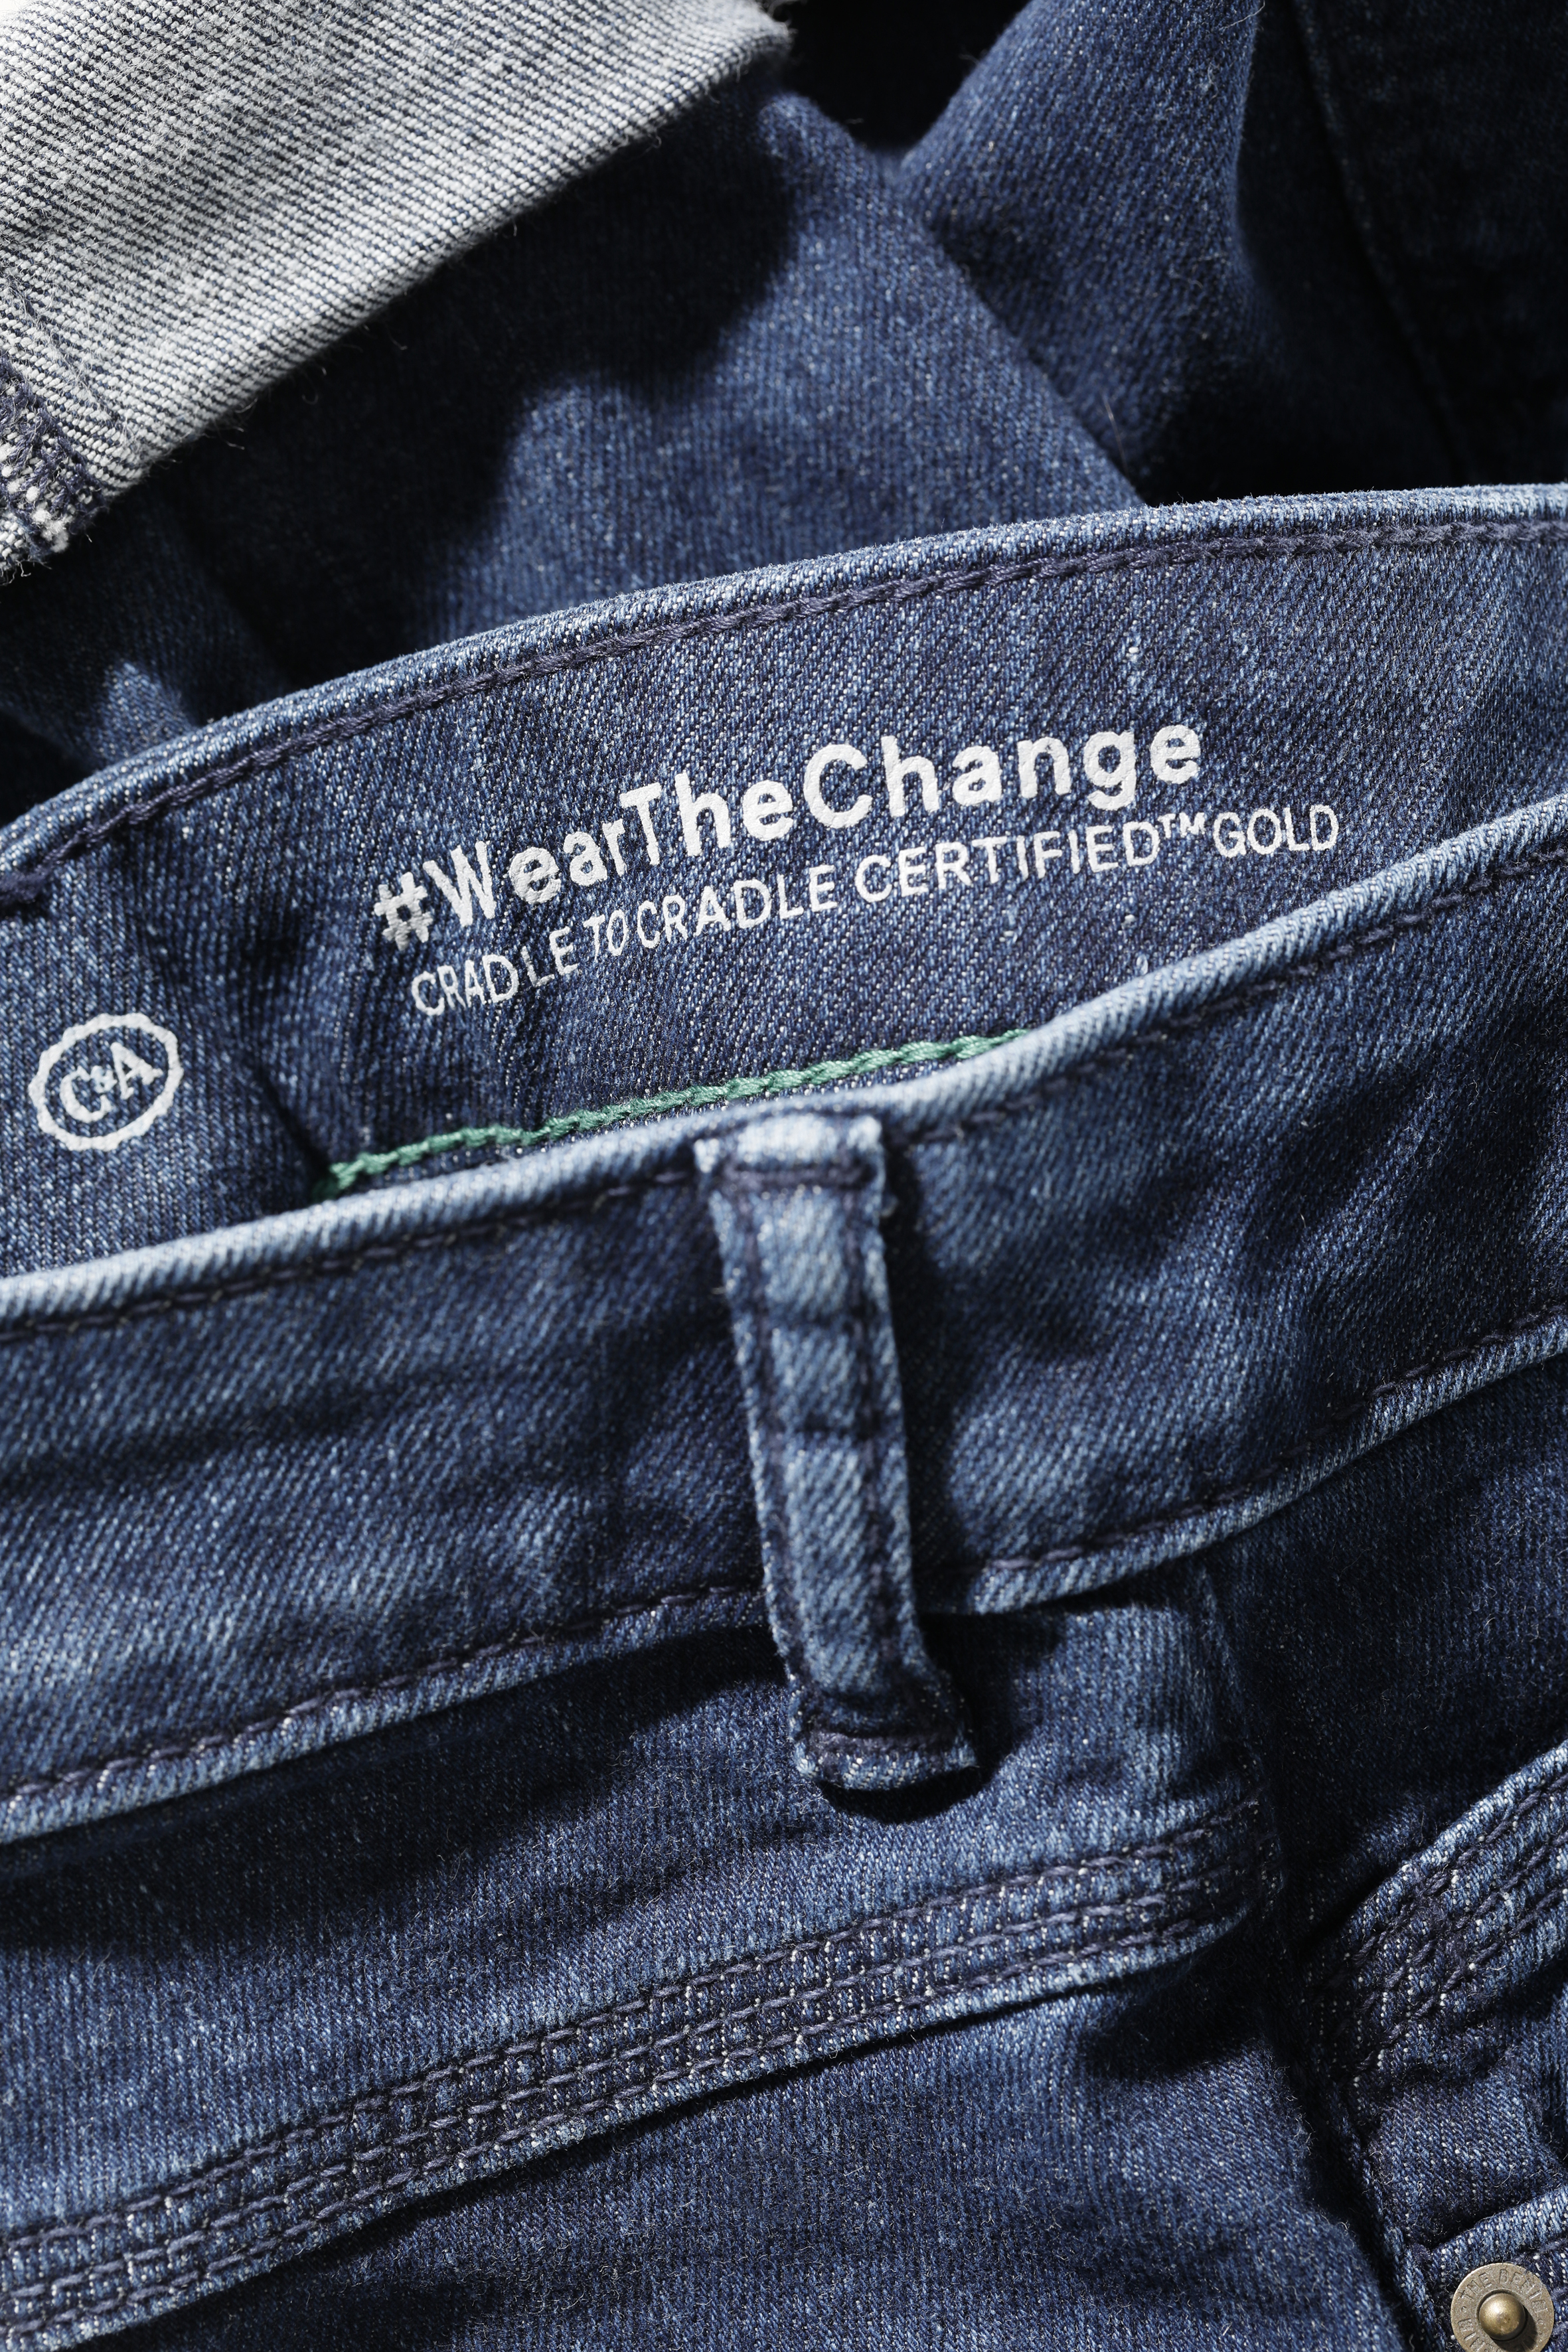 C&A Offers First Ever Cradle to Cradle Certified™ Denim Garment - MBDC